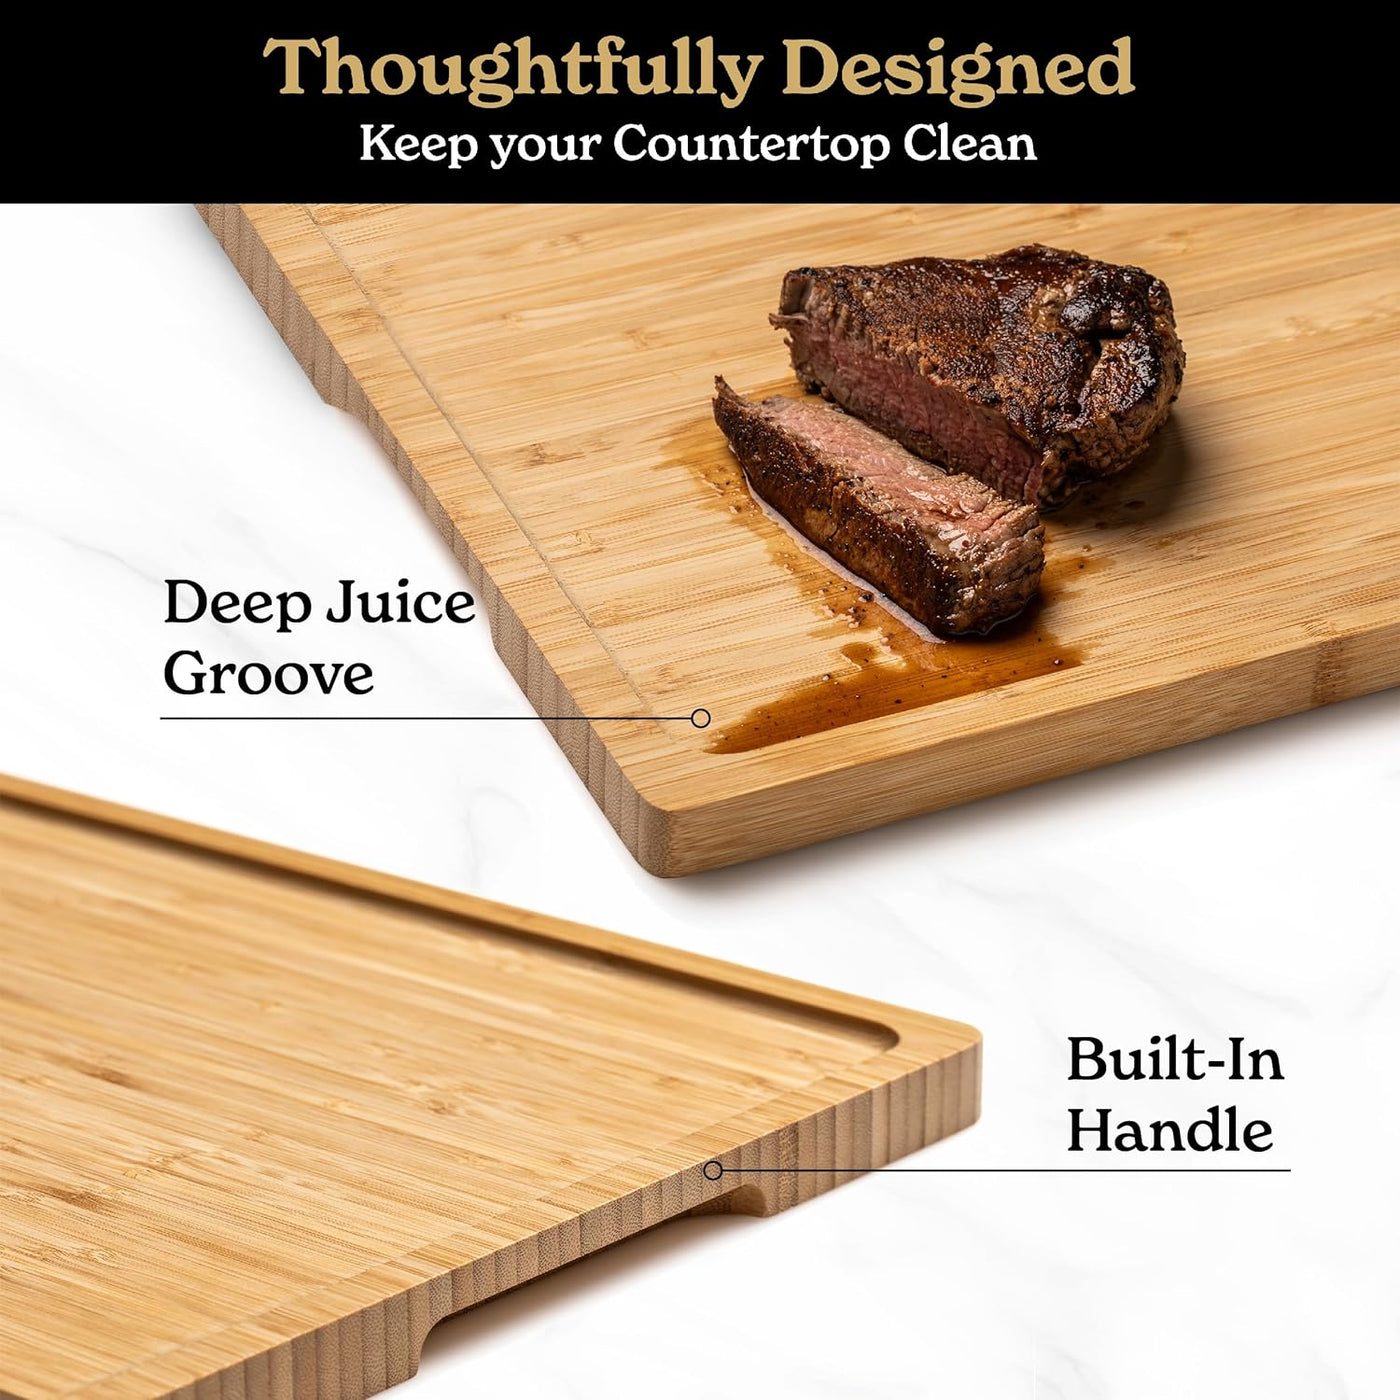 Large Bamboo Cutting Board | Buy A Bamboo Wood Cutting & Serving Board - Smirly